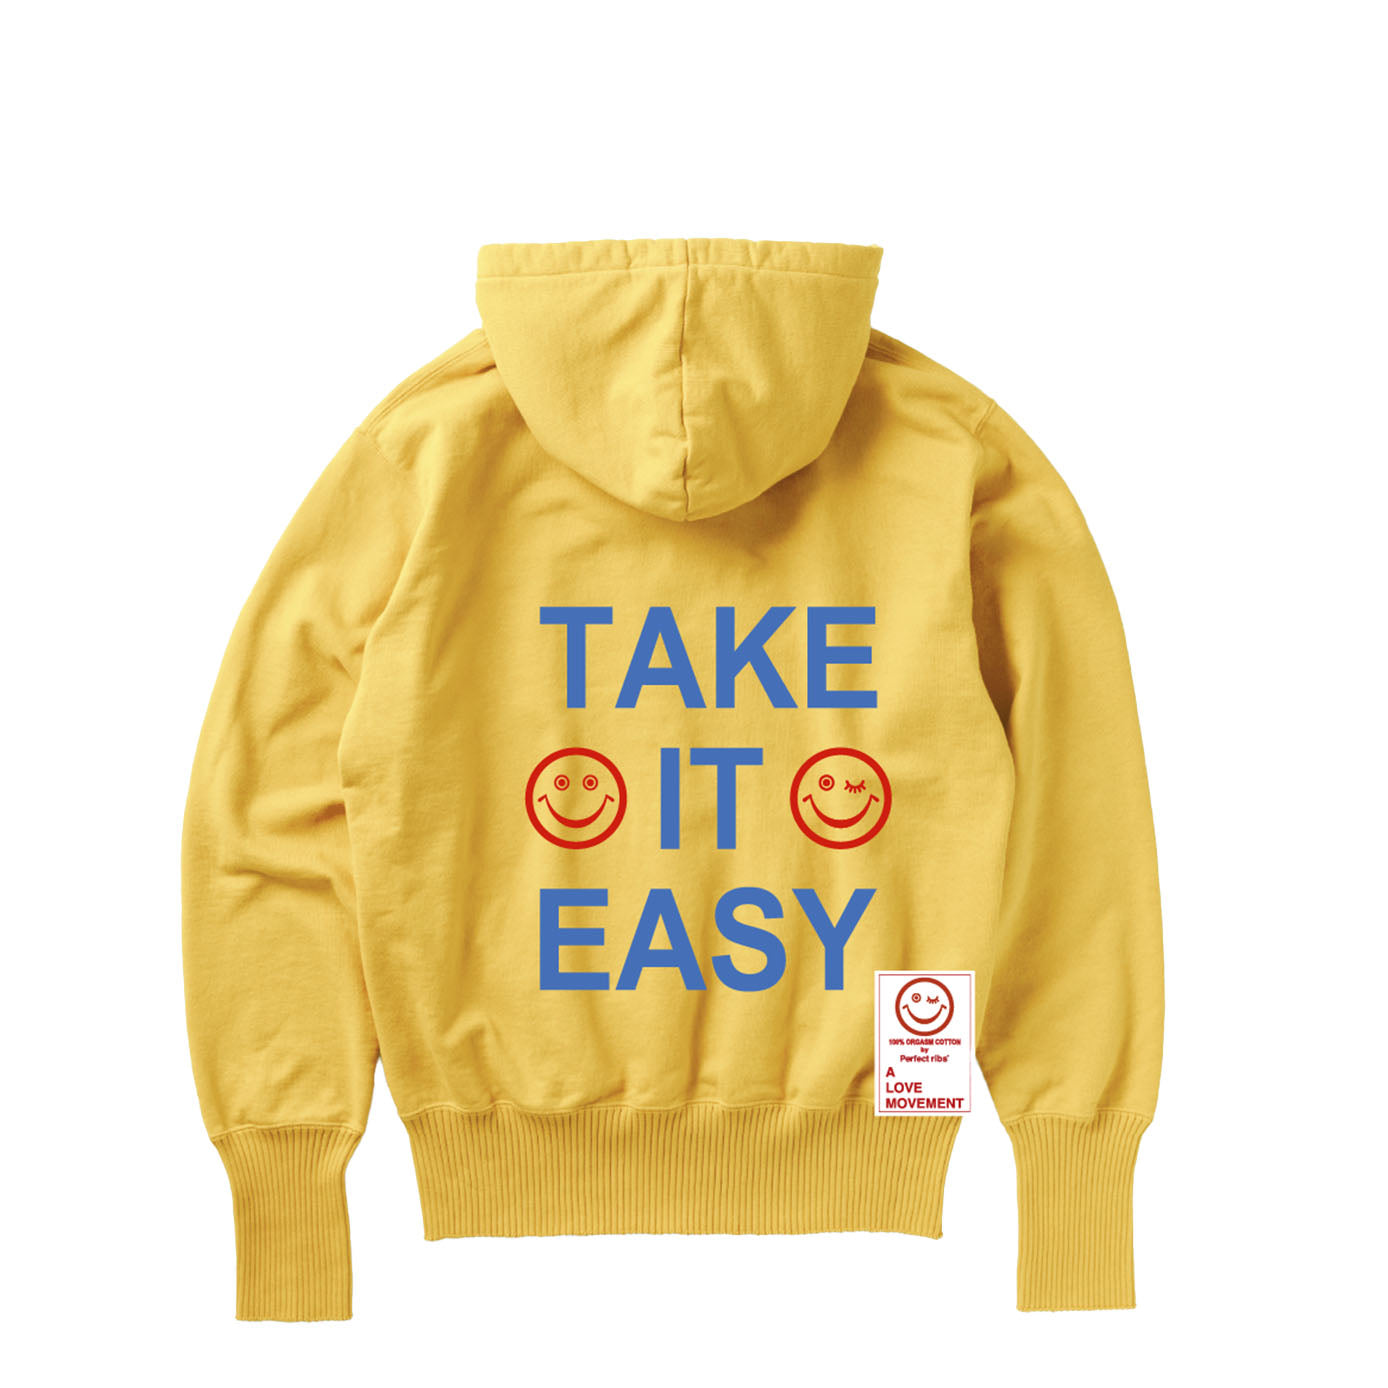 【Perfect ribs®︎×A LOVE MOVEMENT】"RELAX & TAKE IT EASY"Basic Hoodie / Vintage Yellow(ベーシック フーディー/ヴィンテージイエロー)